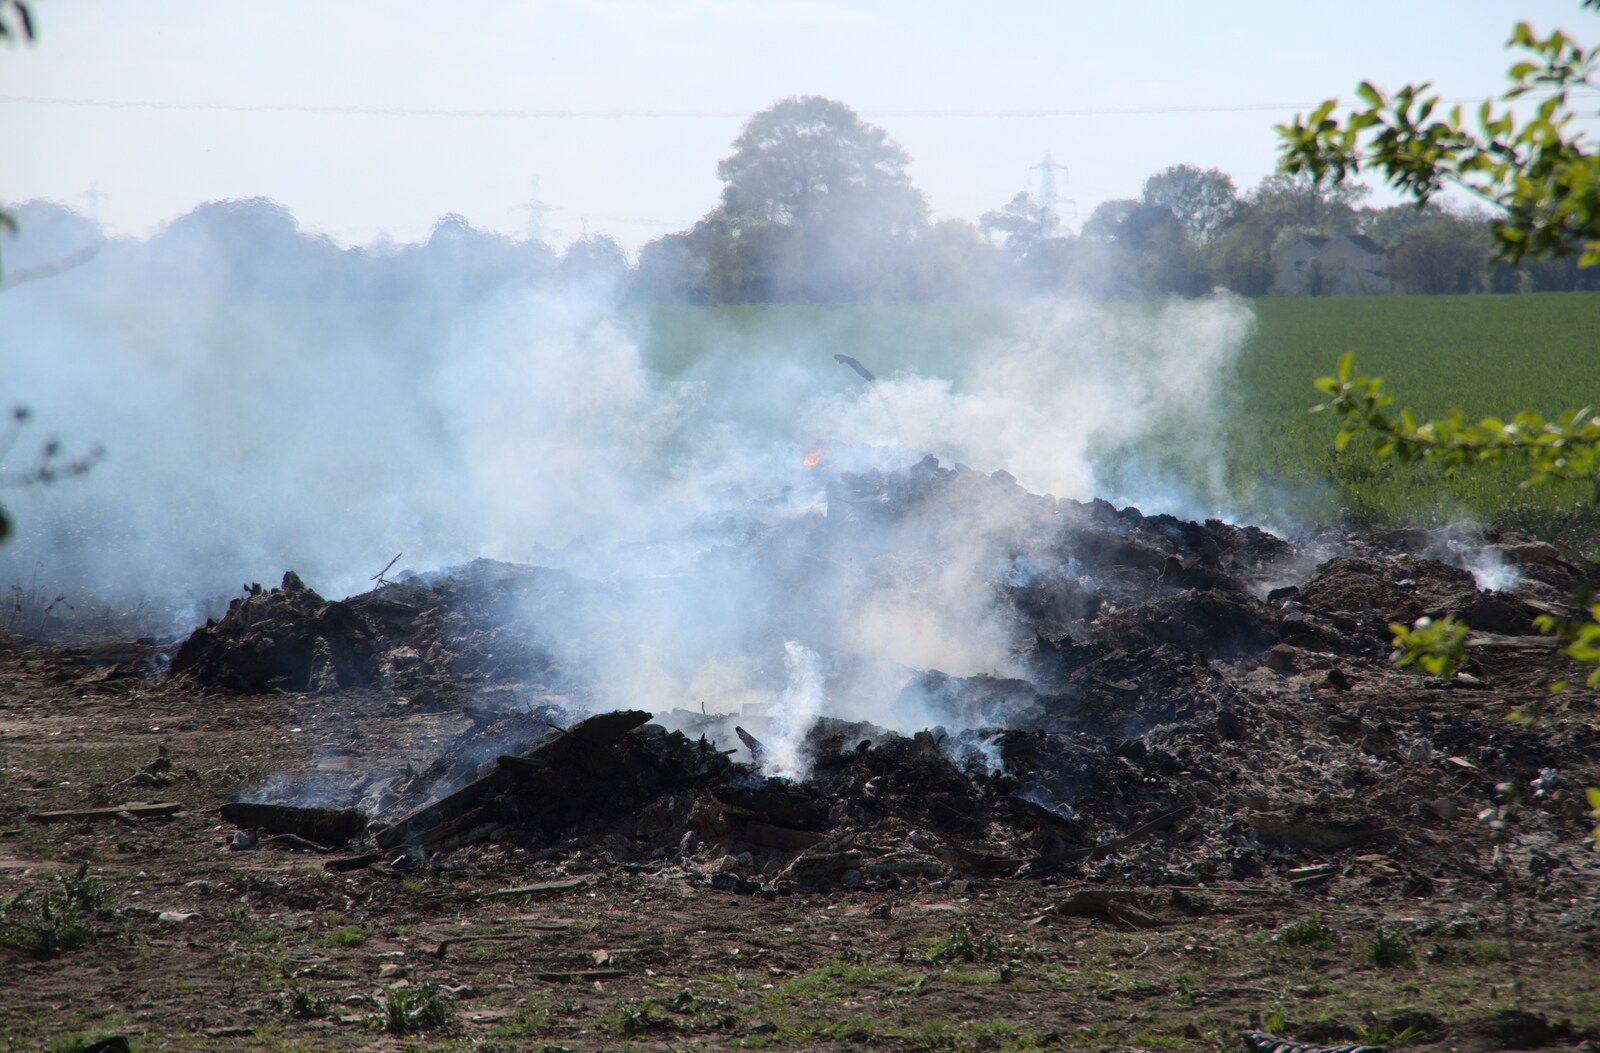 There's a smouldering bonfire on the farm from Lost Cat and a Walk on Nick's Lane, Brome, Suffolk - 26th April 2020